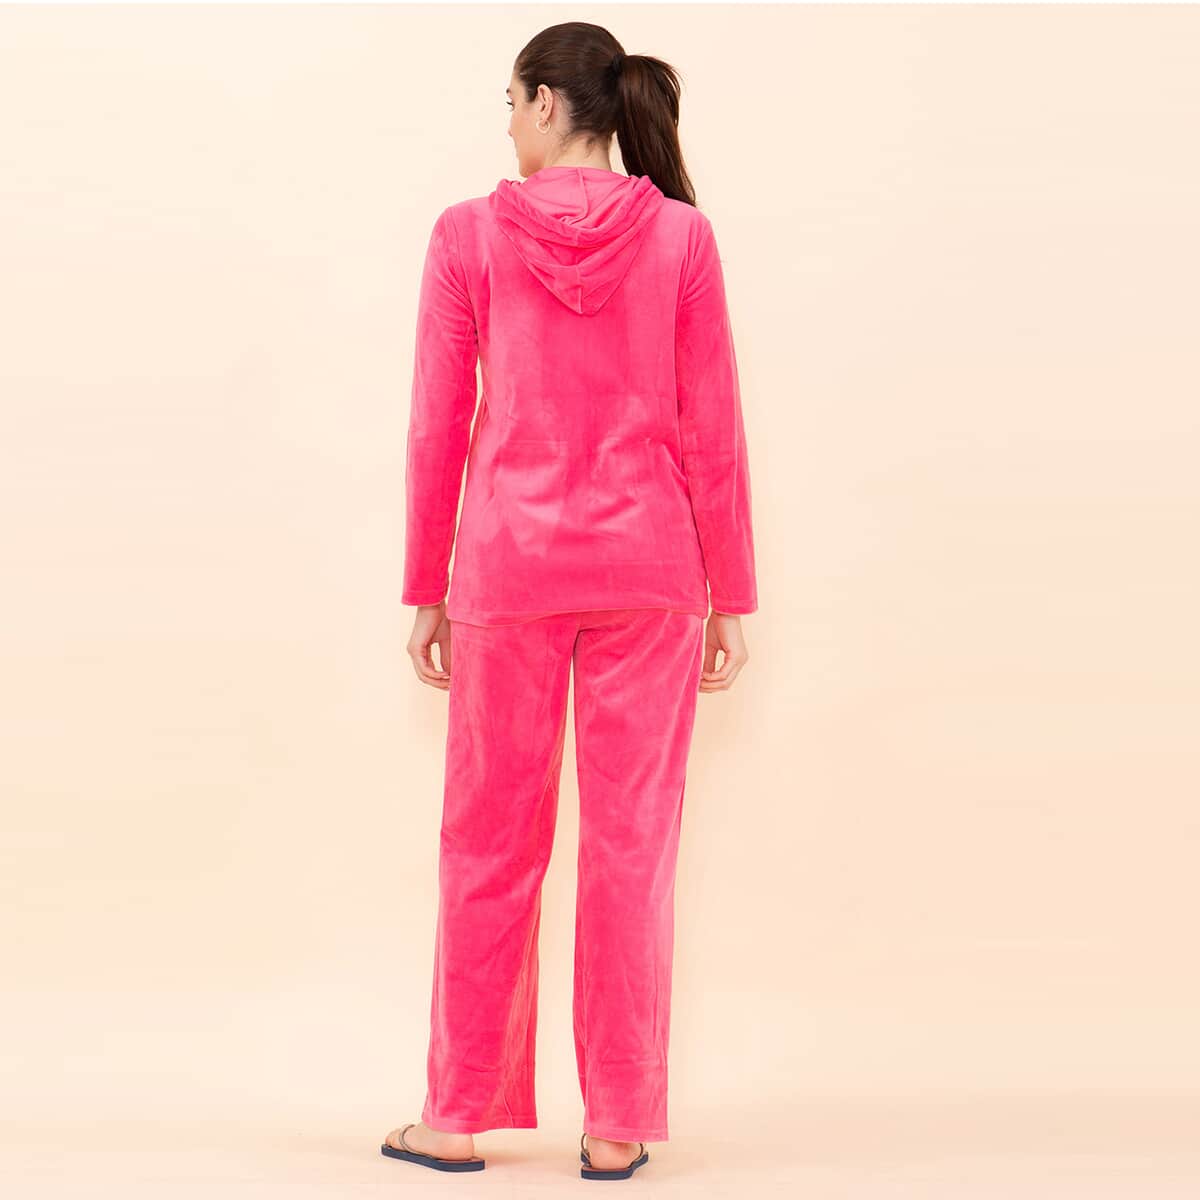 Tamsy LUX Pink Velour Track Suit Set - 3X image number 1